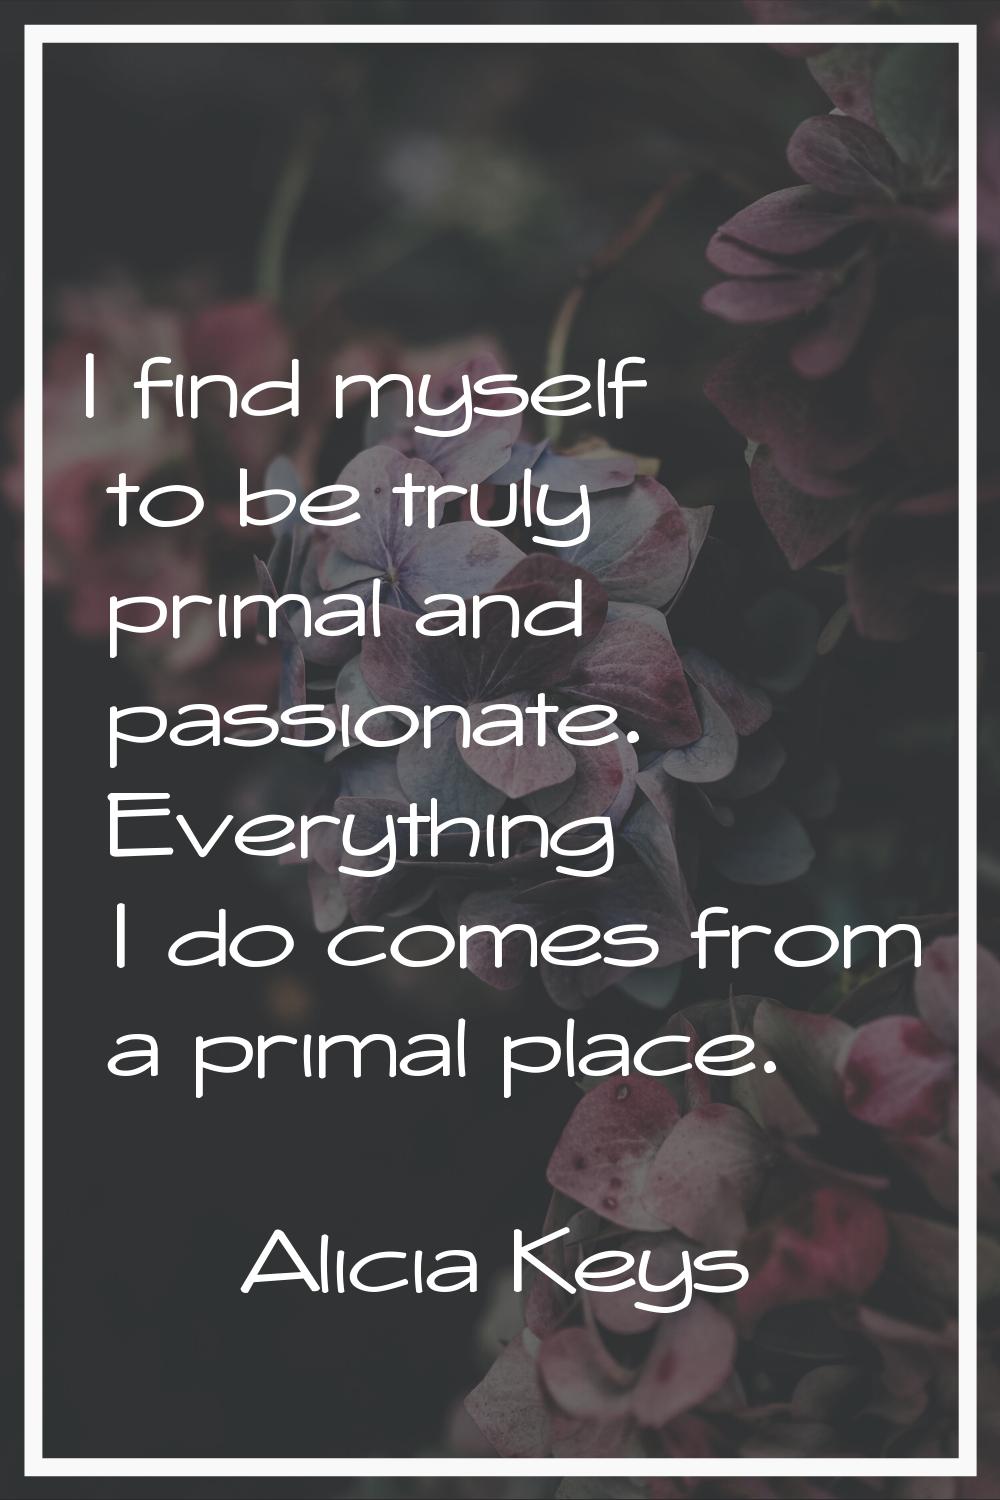 I find myself to be truly primal and passionate. Everything I do comes from a primal place.